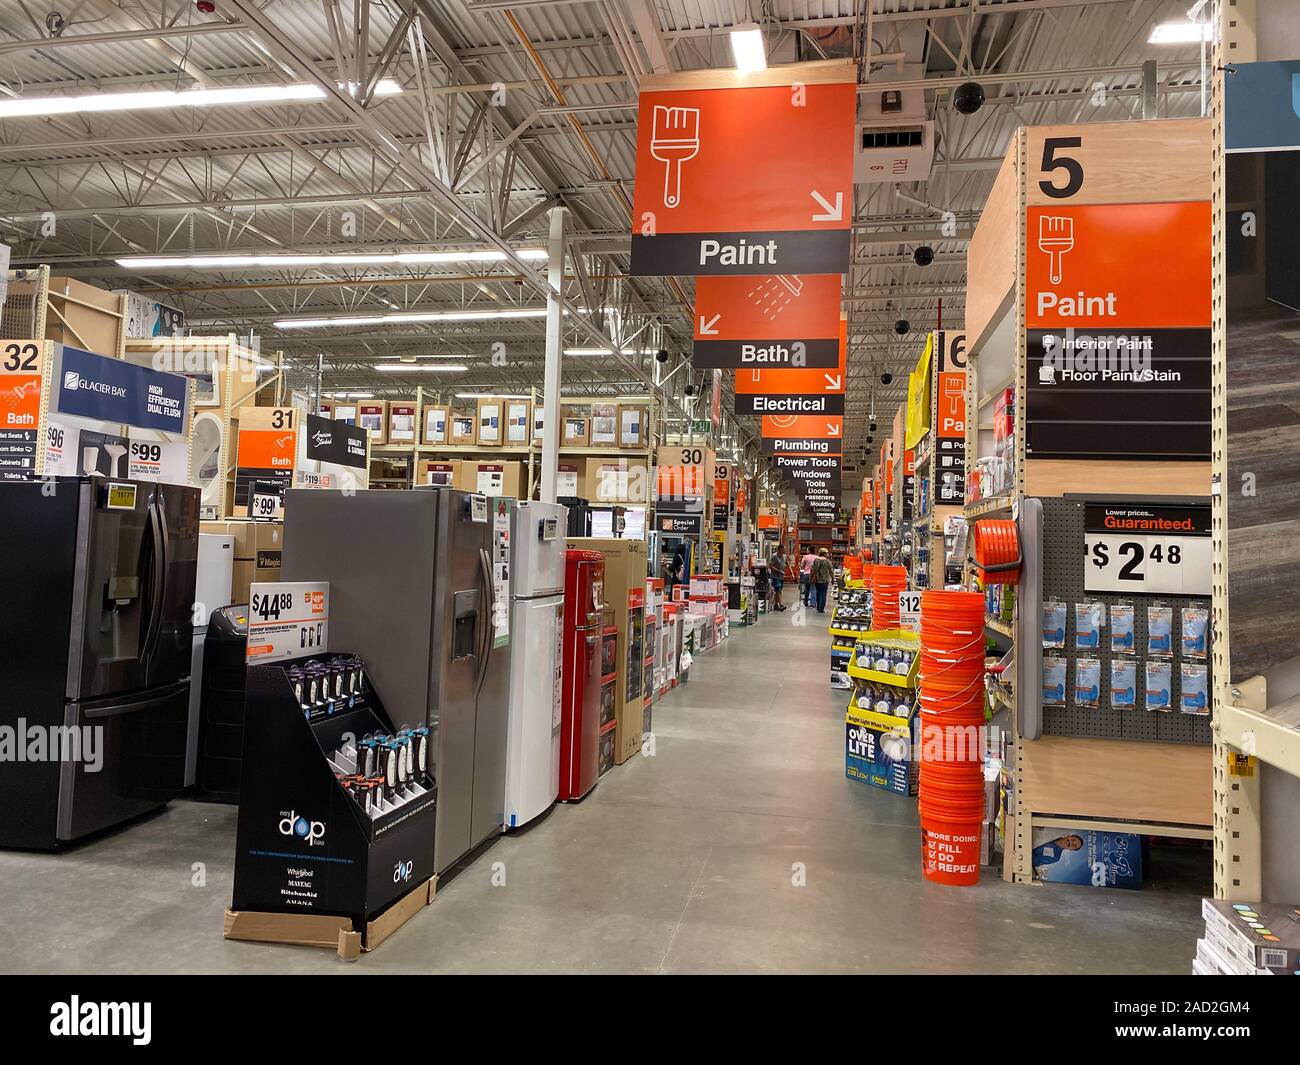 Orlando,FL/USA-11/11/19: The signs hanging from the ceiling at Home Depot home improvement store that designate what departments are in the aisle whil Stock Photo